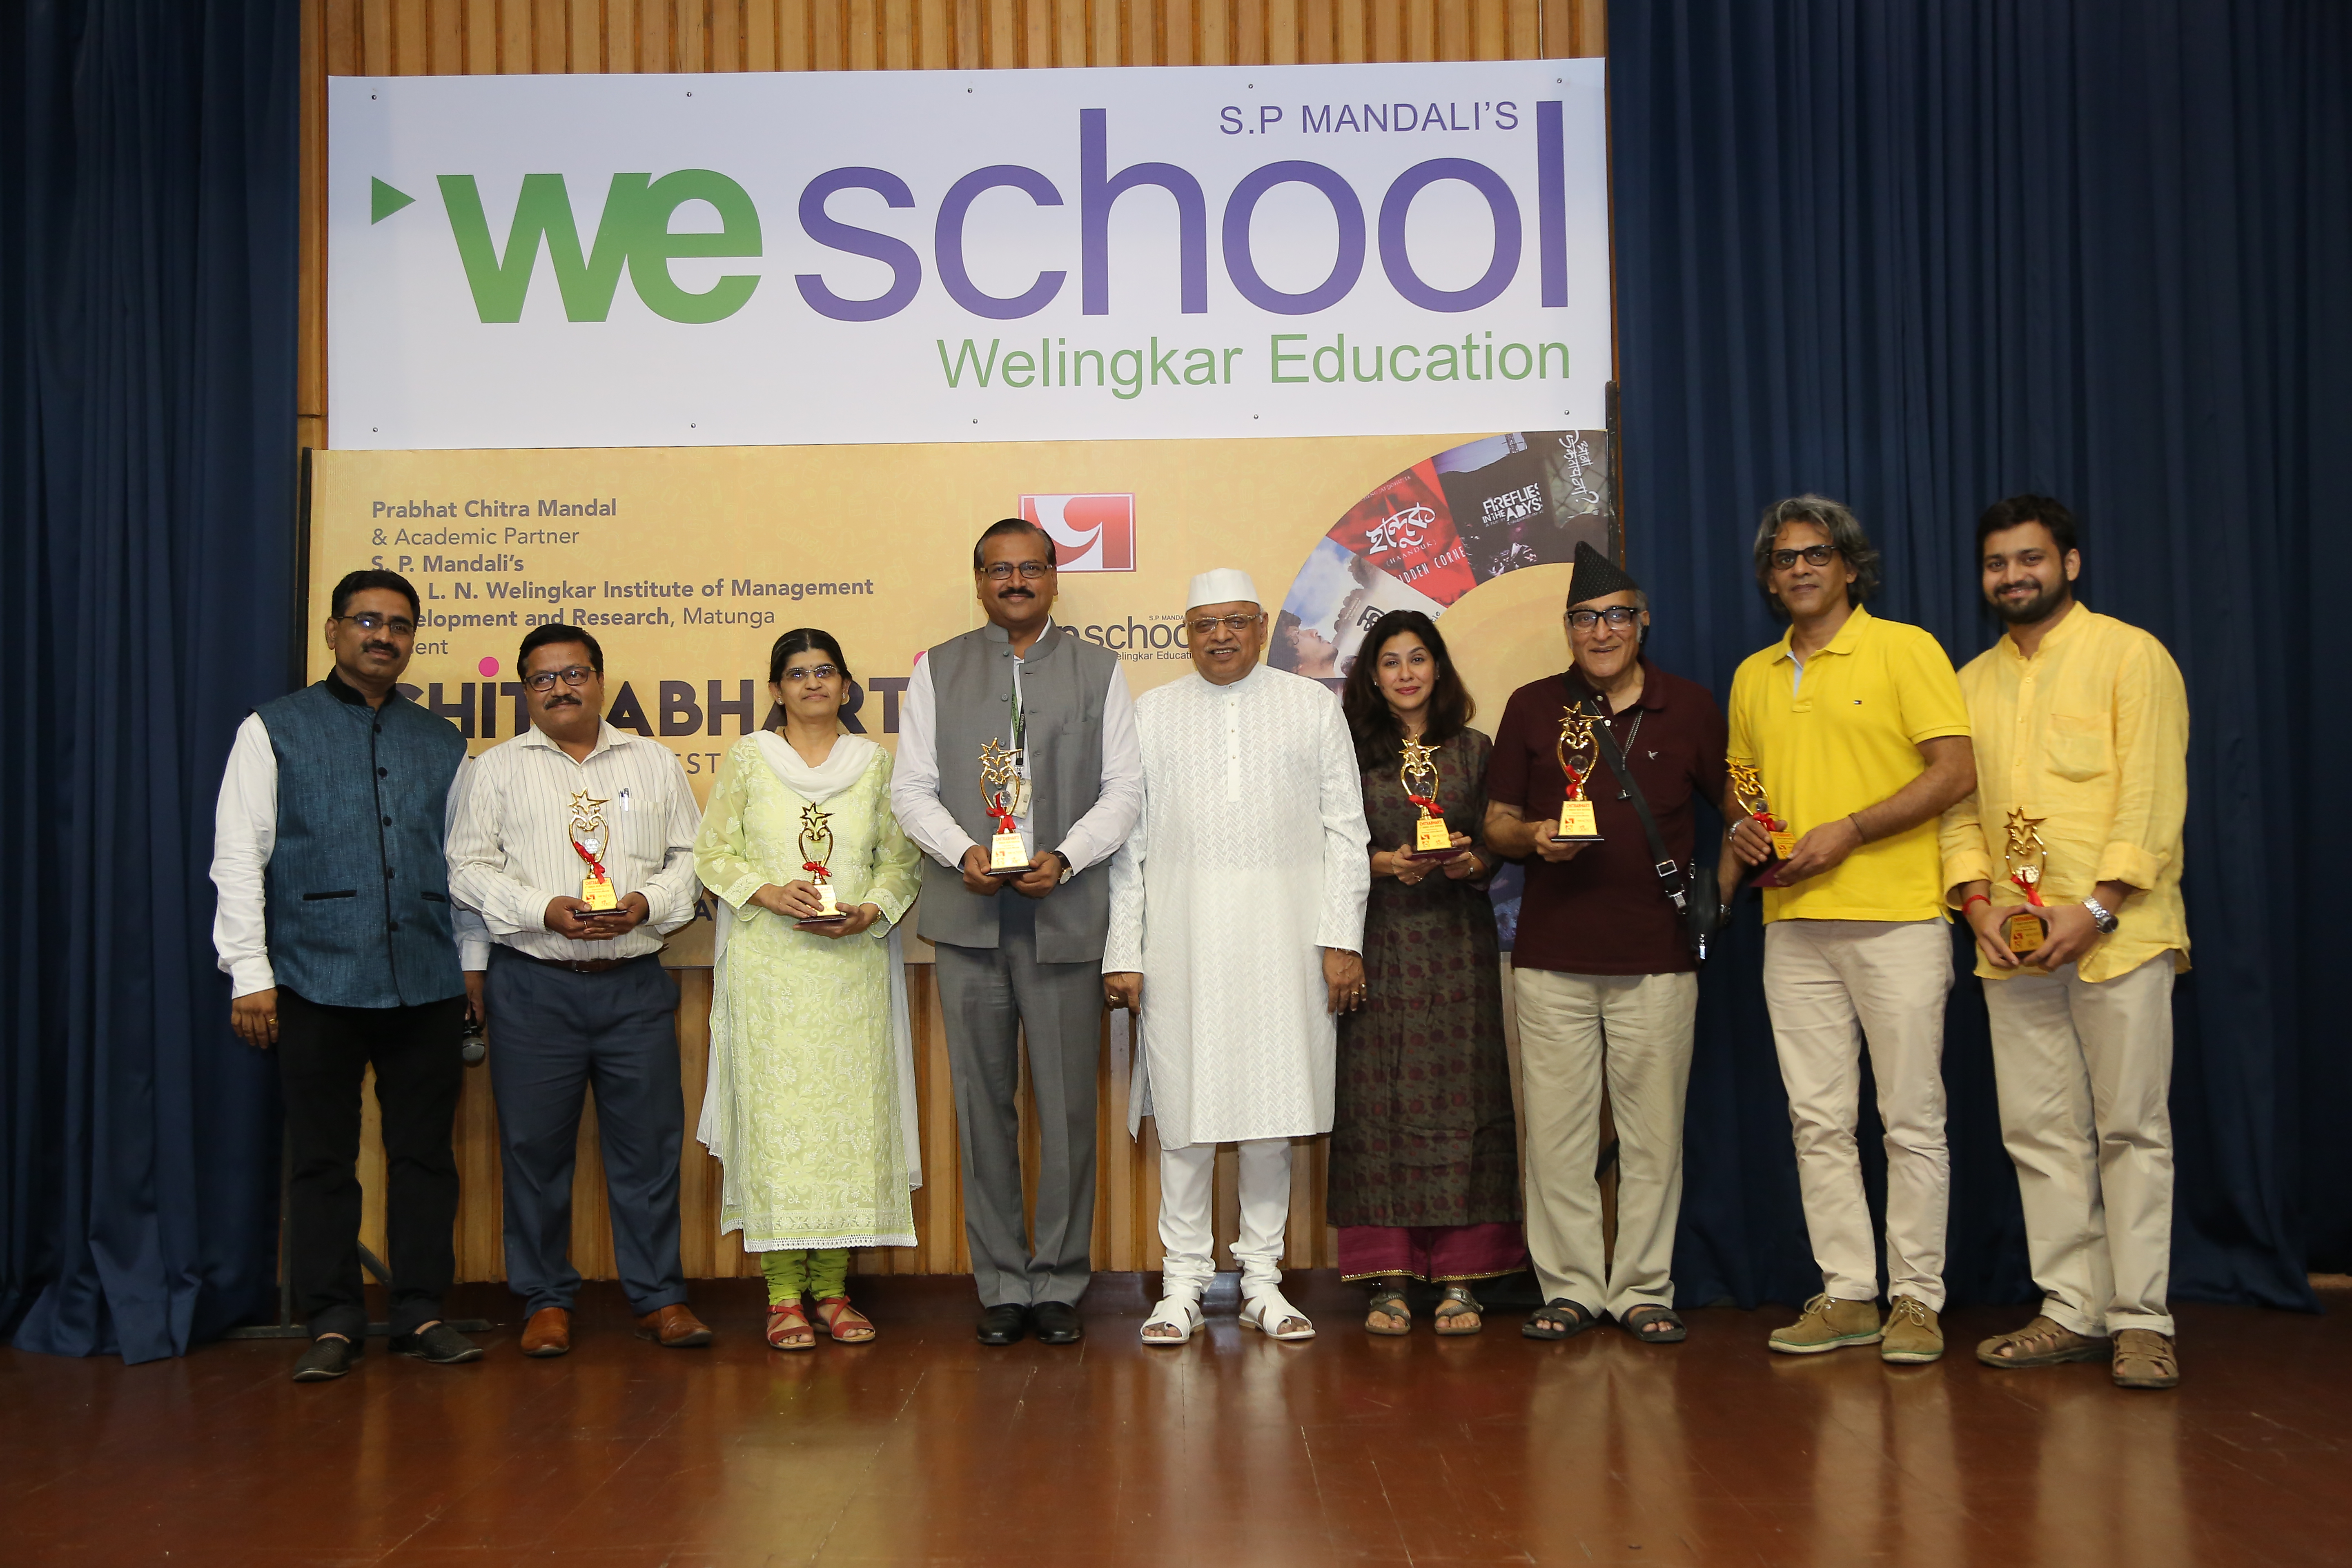 The Fifth Edition of 'Chitrabharti' by Prabhat Chitra Mandal at WeSchool draws Film Critics, Luminaries from Film Industry and Movie Buffs